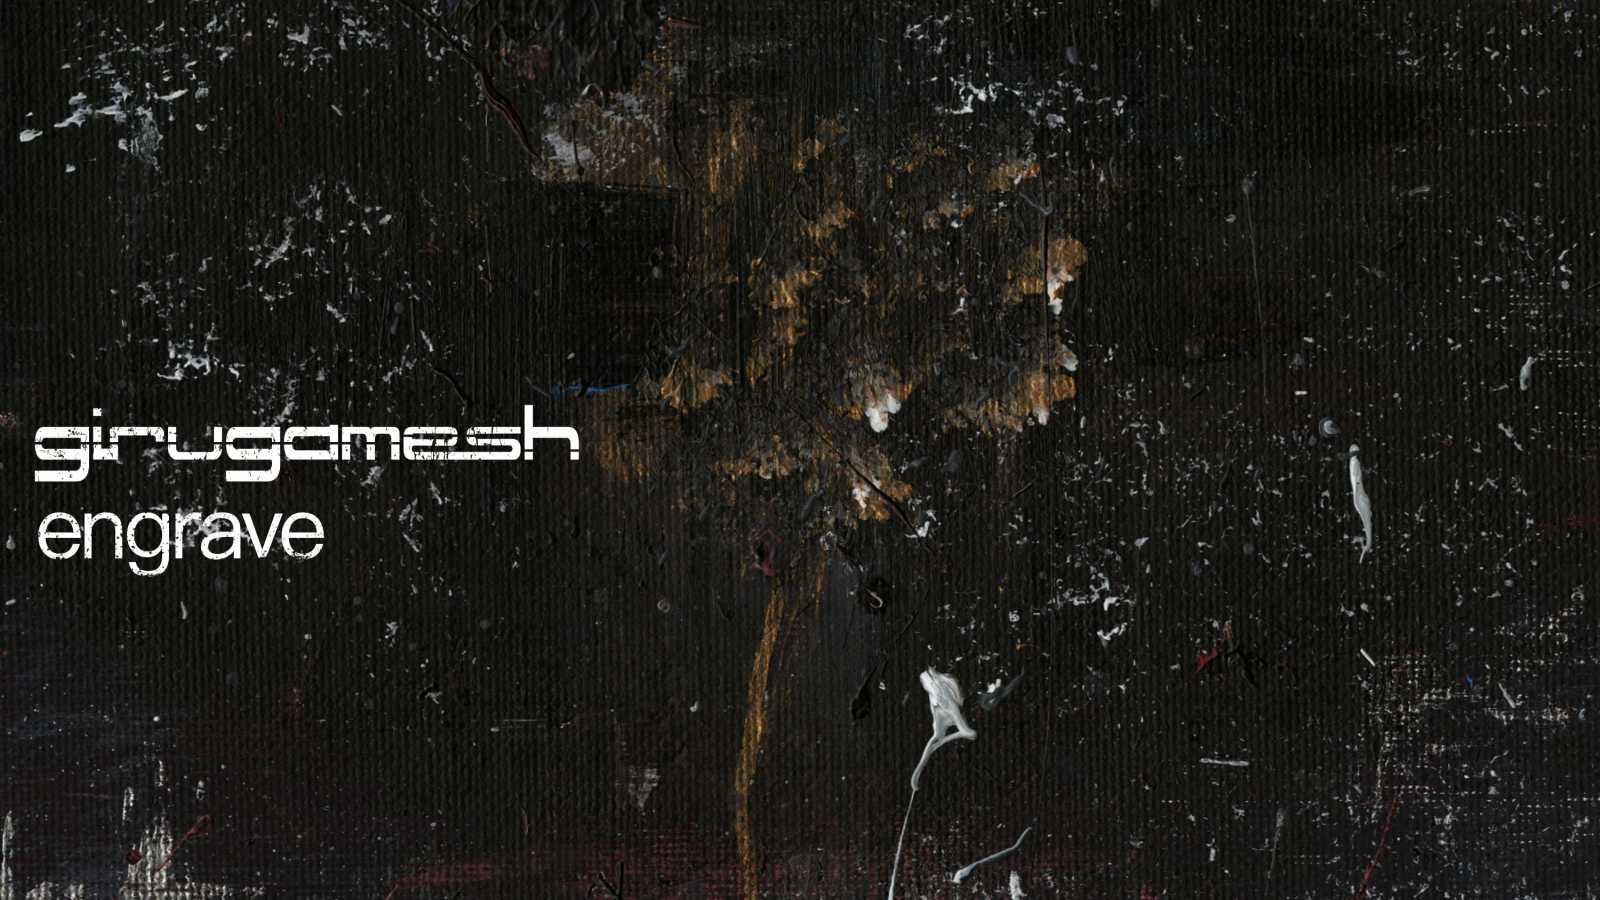 New Digital Single from girugamesh © MAVERICK DC GROUP. All rights reserved.